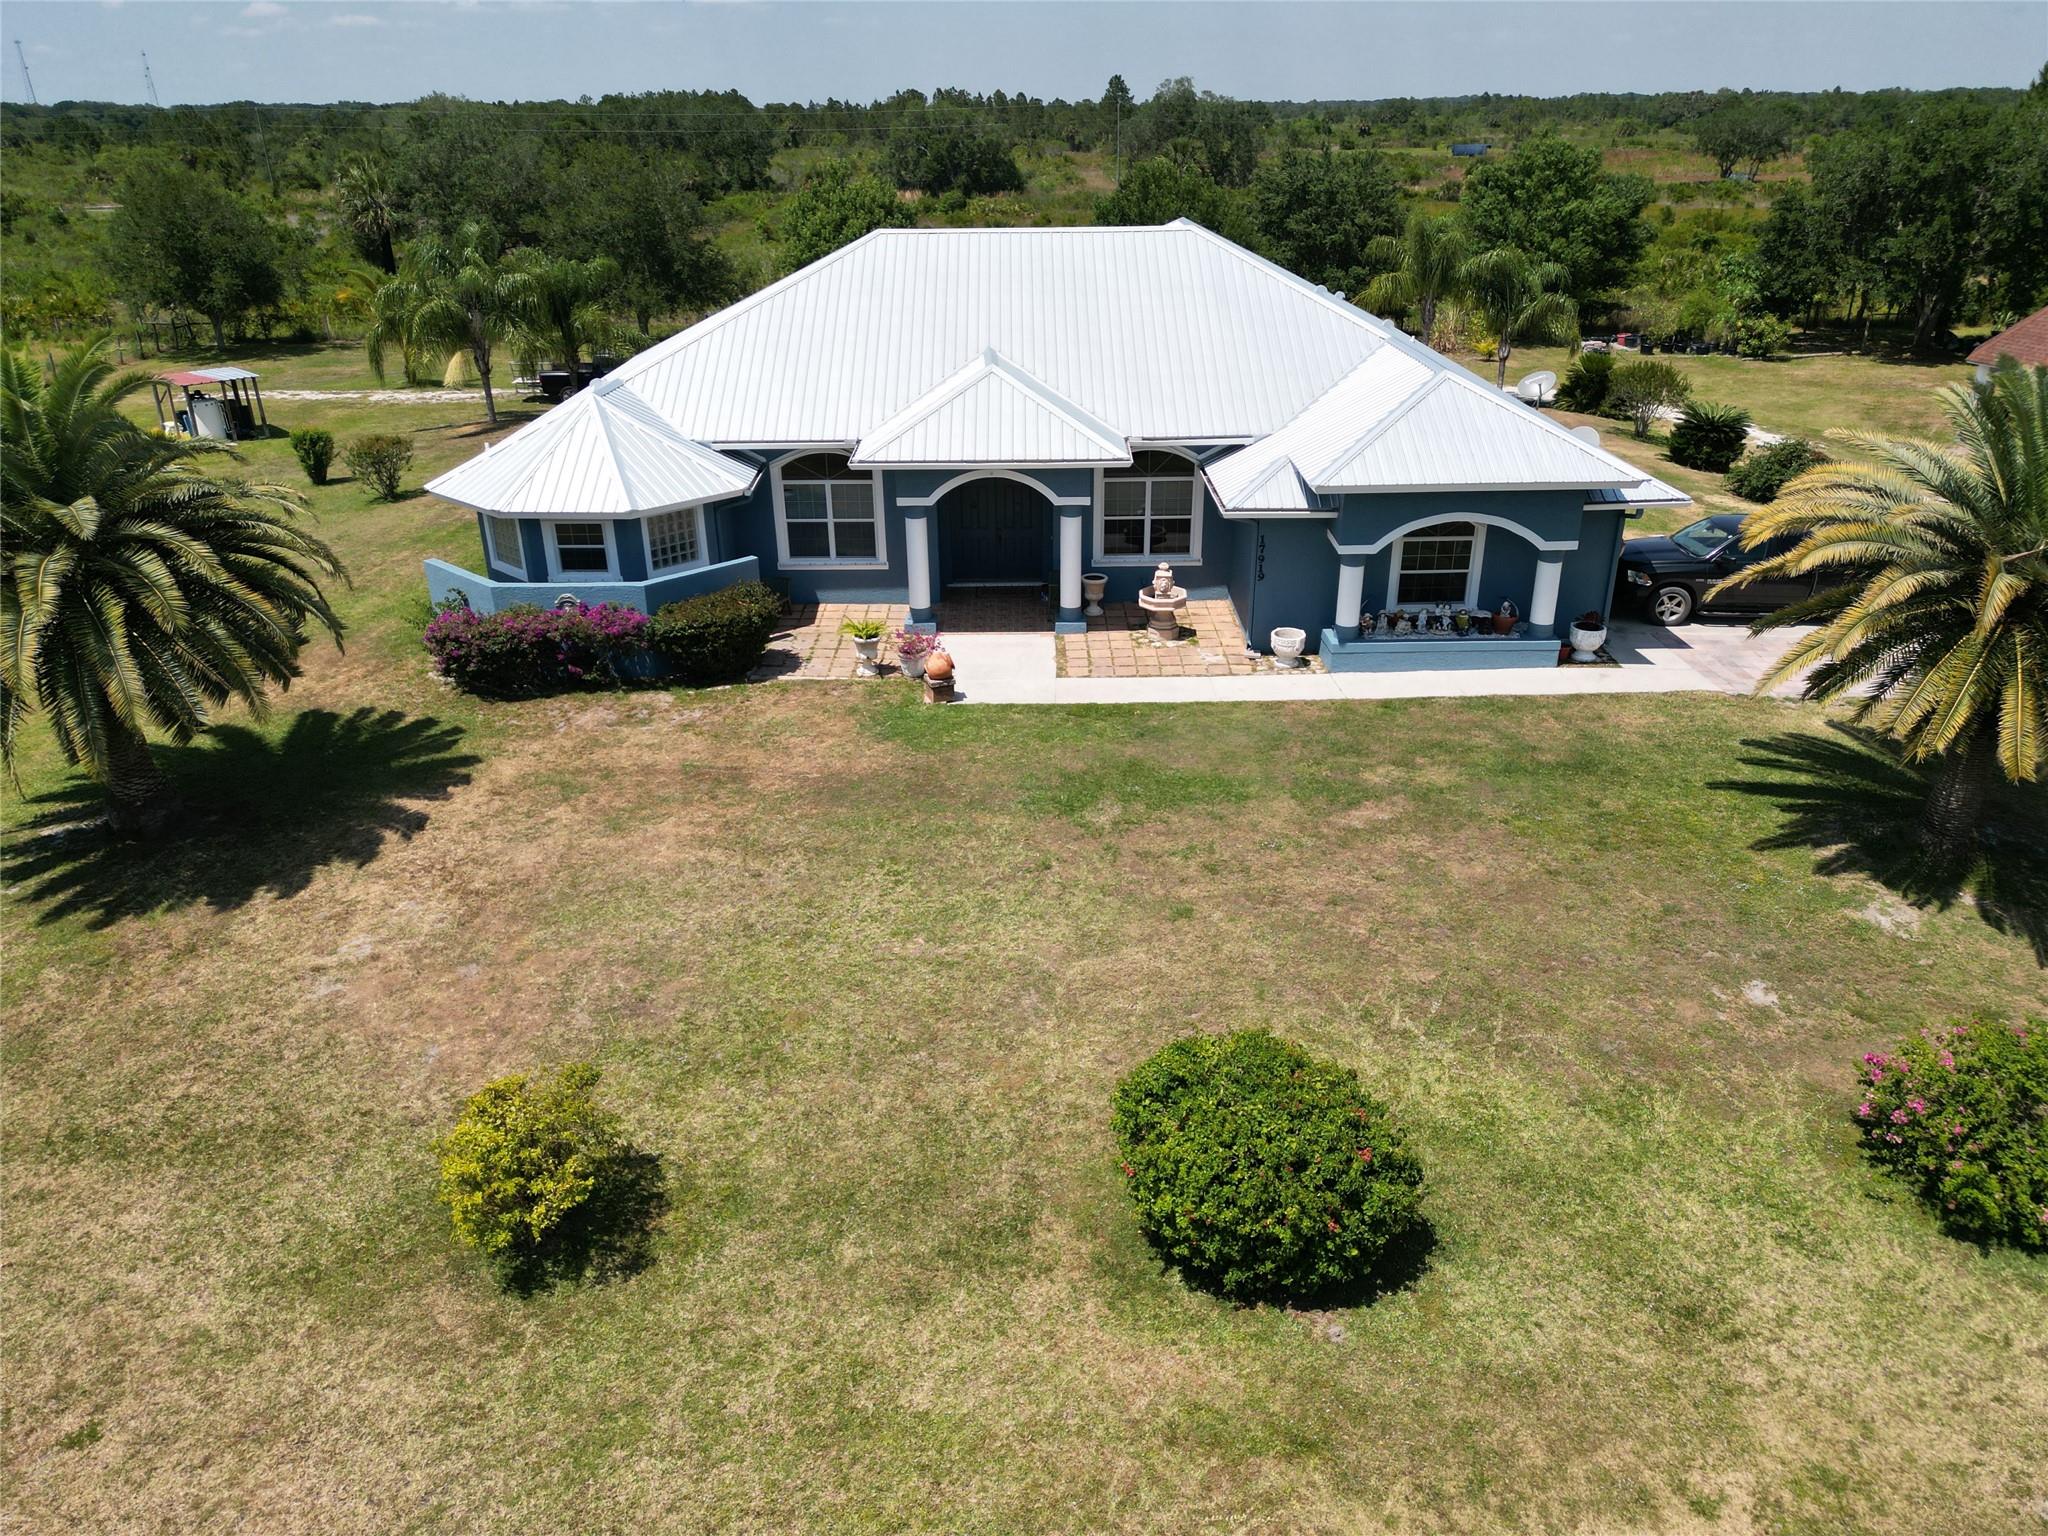 Beautiful Country Paradise! This manicured estate offers 3.75 Acres, fully fenced w/ 3 bedroom, 2.5 baths, 2 car garage, w/ 12 foot ceilings, office, great room, formal dining, morning nook, large kitchen with bar & ss applicances, granite tops, butlers pantry/mudroom, foyer, laundry rm, formal living room, master suite w/ tray ceilings, large tub, huge walkin shower, his & hers closets, large covered patio for entertaining. Outdoors you'll enjoy mature trees, park benches through out the property, and a large gazebo for relaxing & enjoying the outdoors! Sale includes a NEW METAL ROOF, 3 yr AC, & WH. chicken coops, small barn, hand pump on well, water system, washer & dryer.  This is a serene and calming life! Gorgeous sunsets, wildlife in abundance, animals & farming & plenty of privacy! Near the Kissimmee Prairie State Park, offering many nature related activities! Also available for sale is an additional adjoining 1.25 acre parcel for $45,000. Enjoy a total of 5 ACRES!